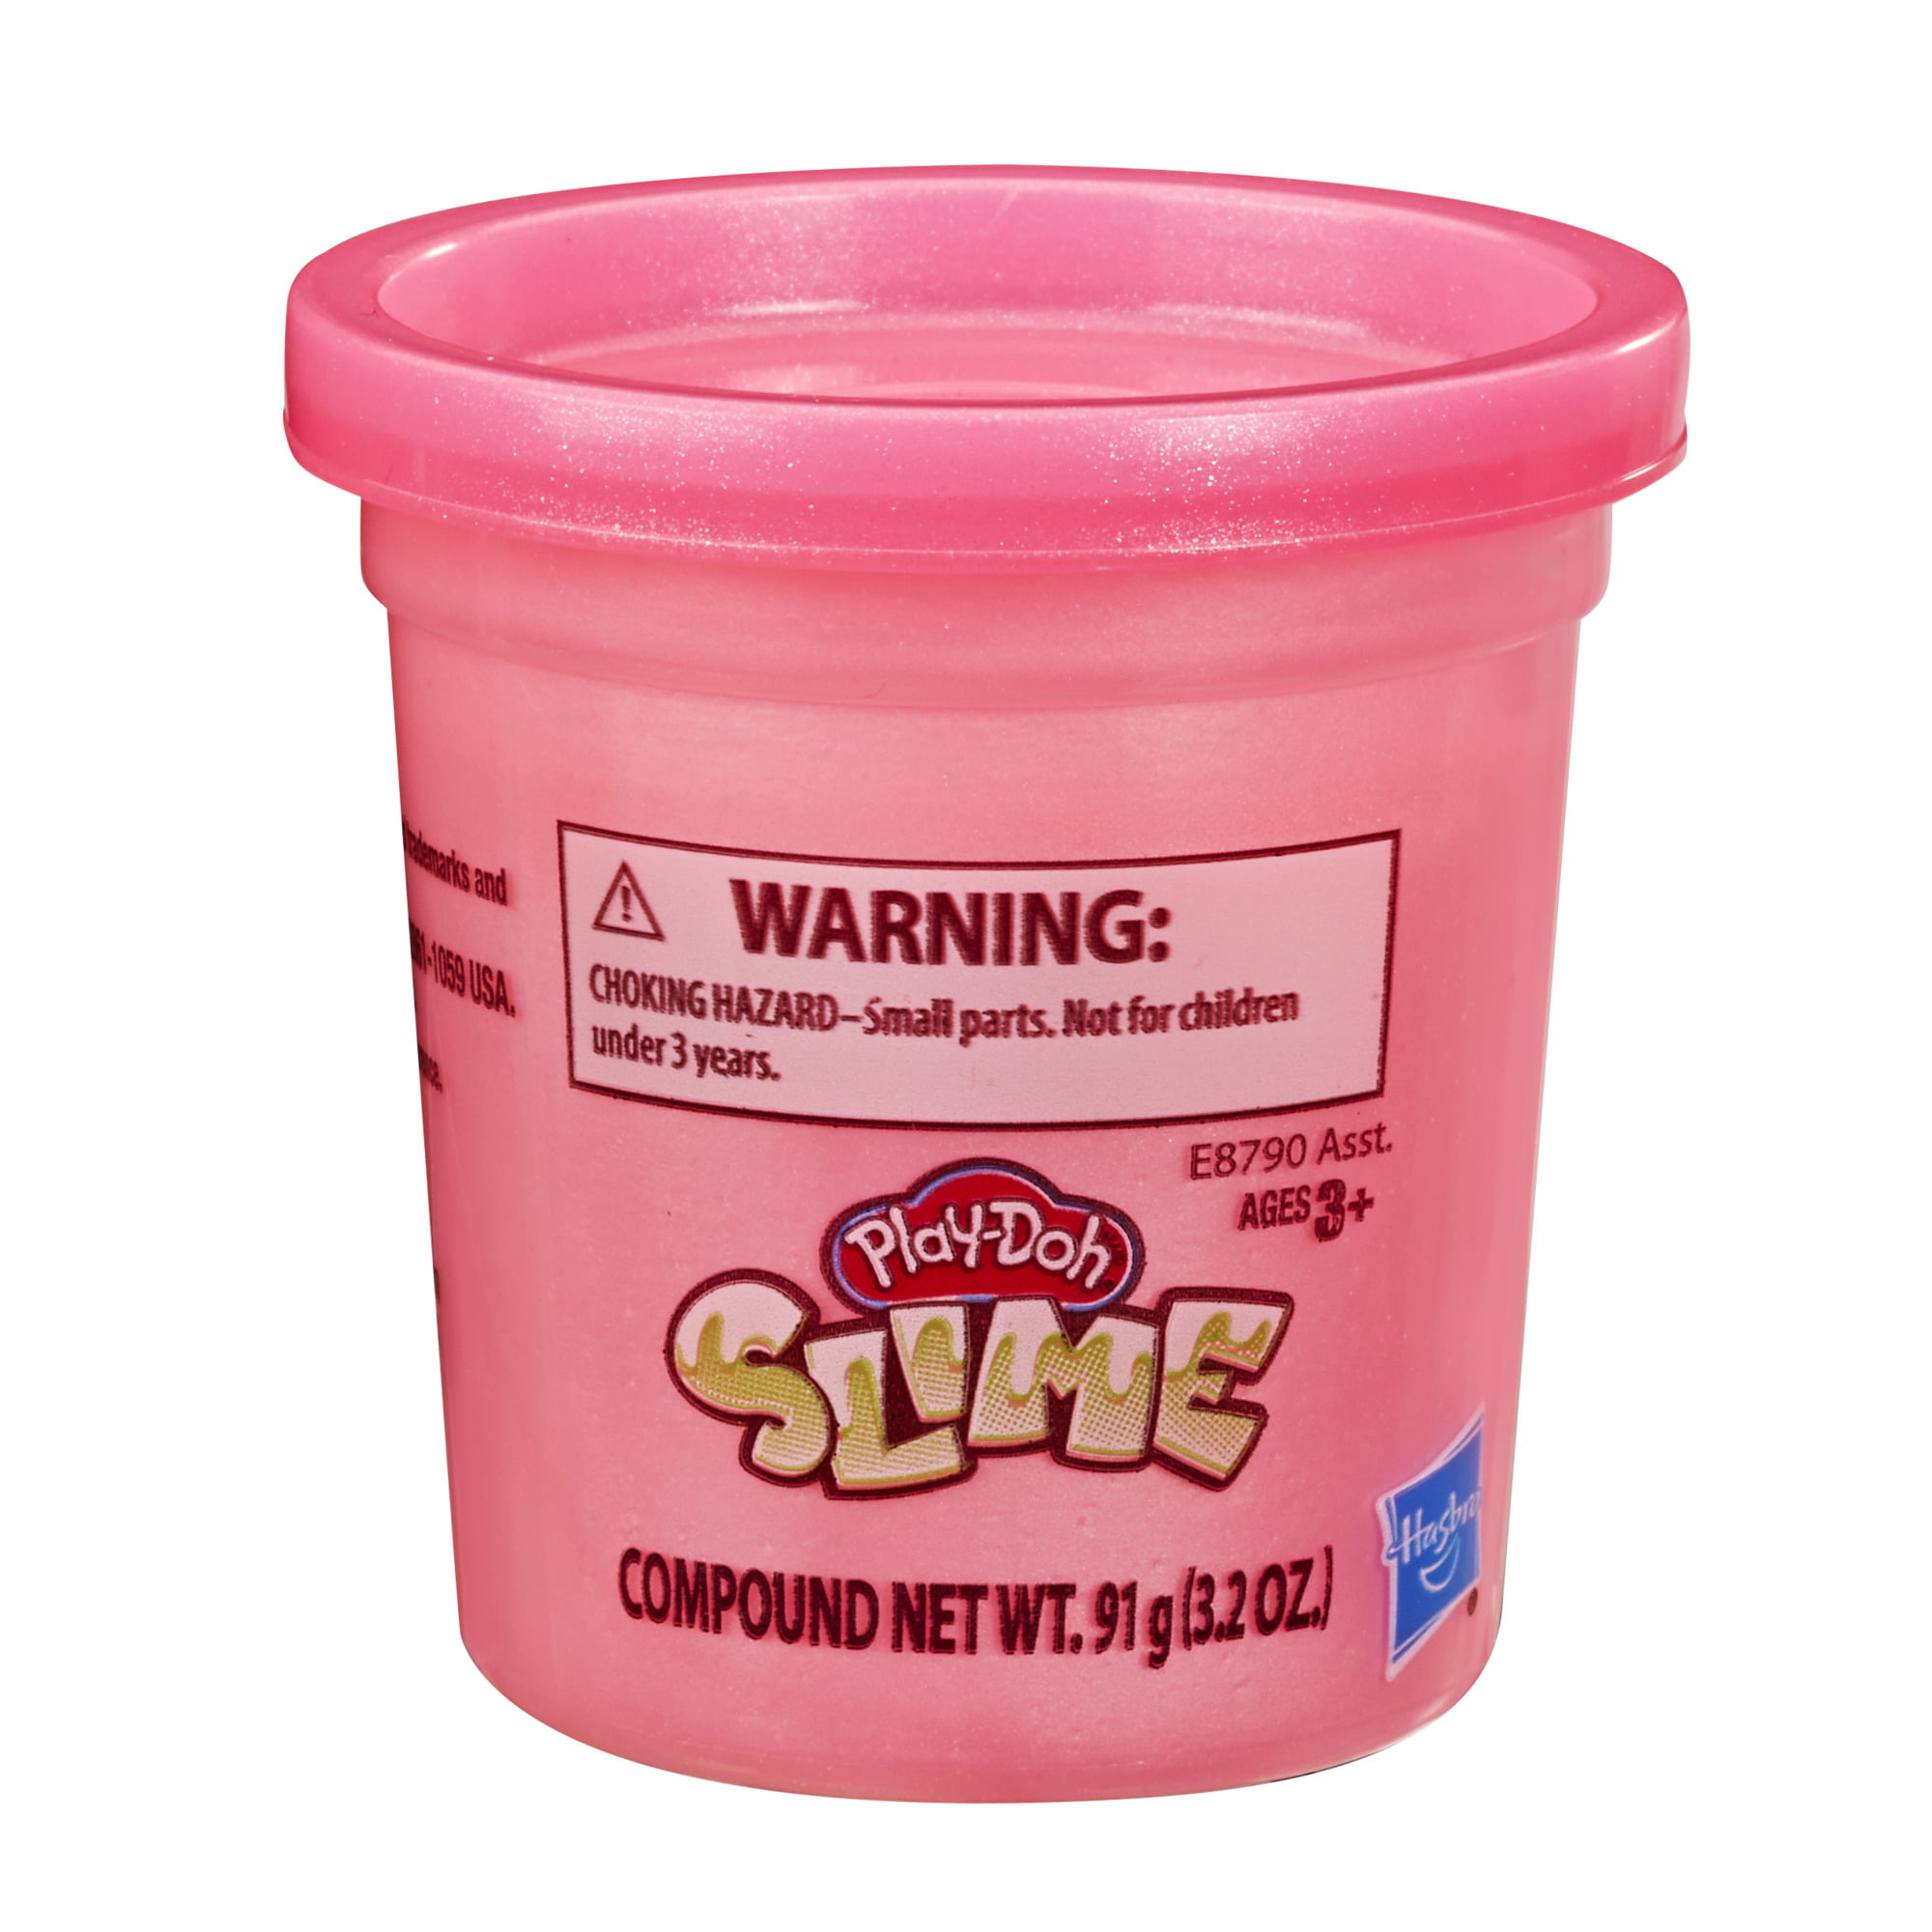 Case for Play-Doh Modeling Compound 20-Pack Case of Colors 3-Ounce